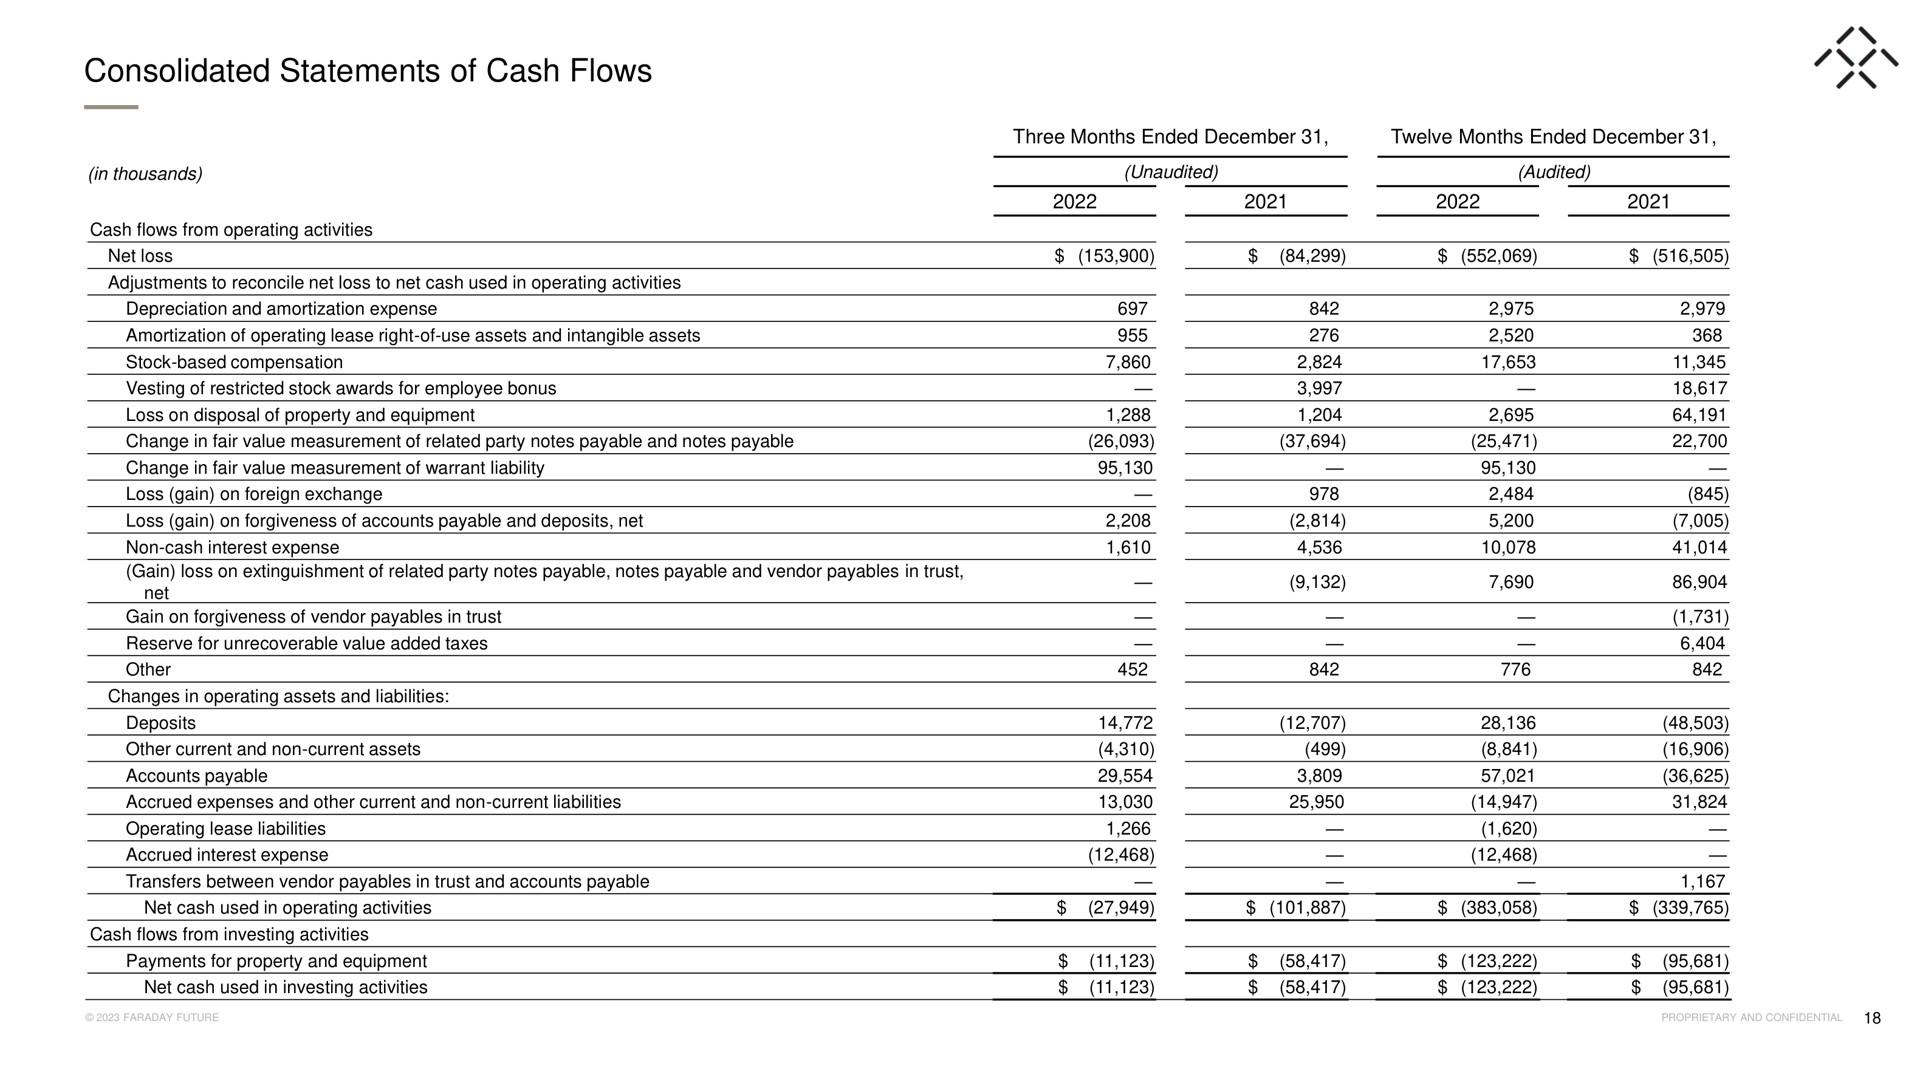 consolidated statements of cash flows | Faraday Future